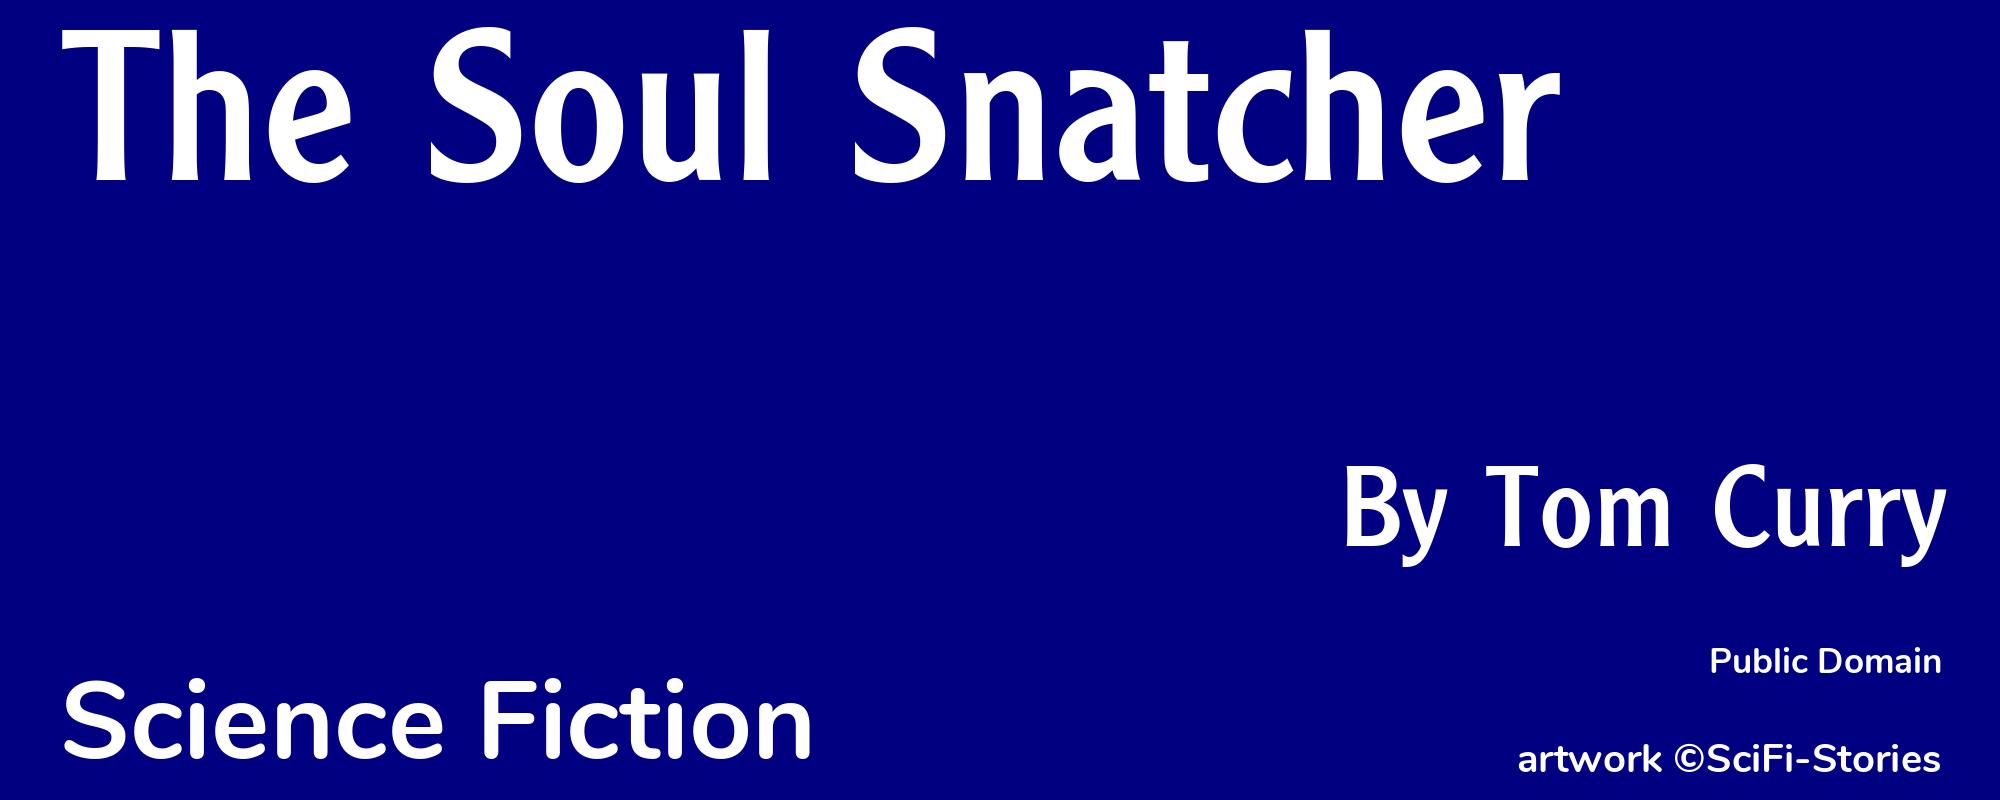 The Soul Snatcher - Cover